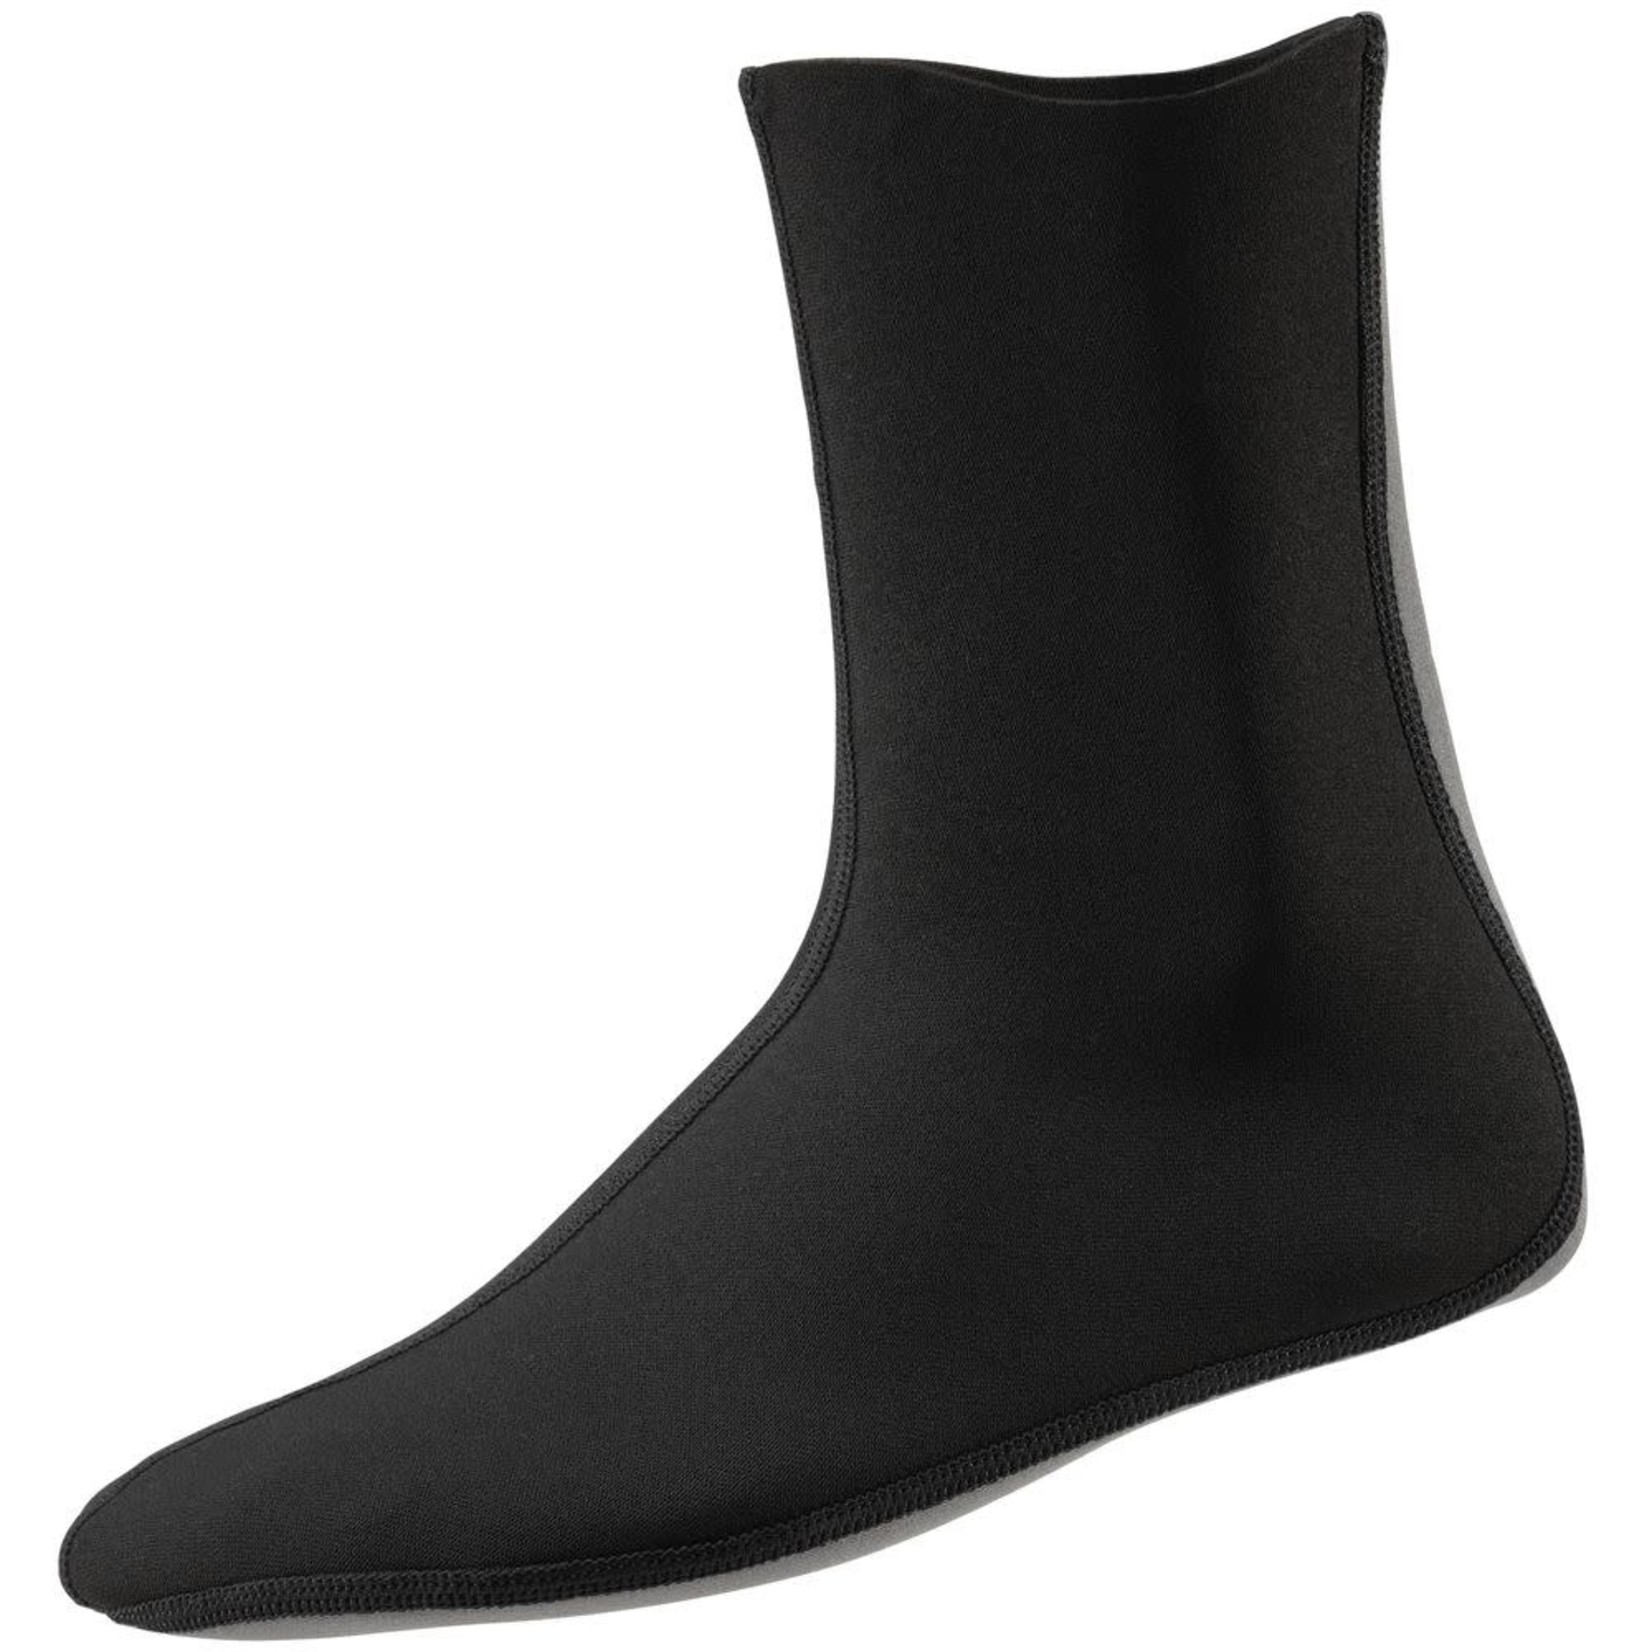 NRS NRS Outfitter Socks